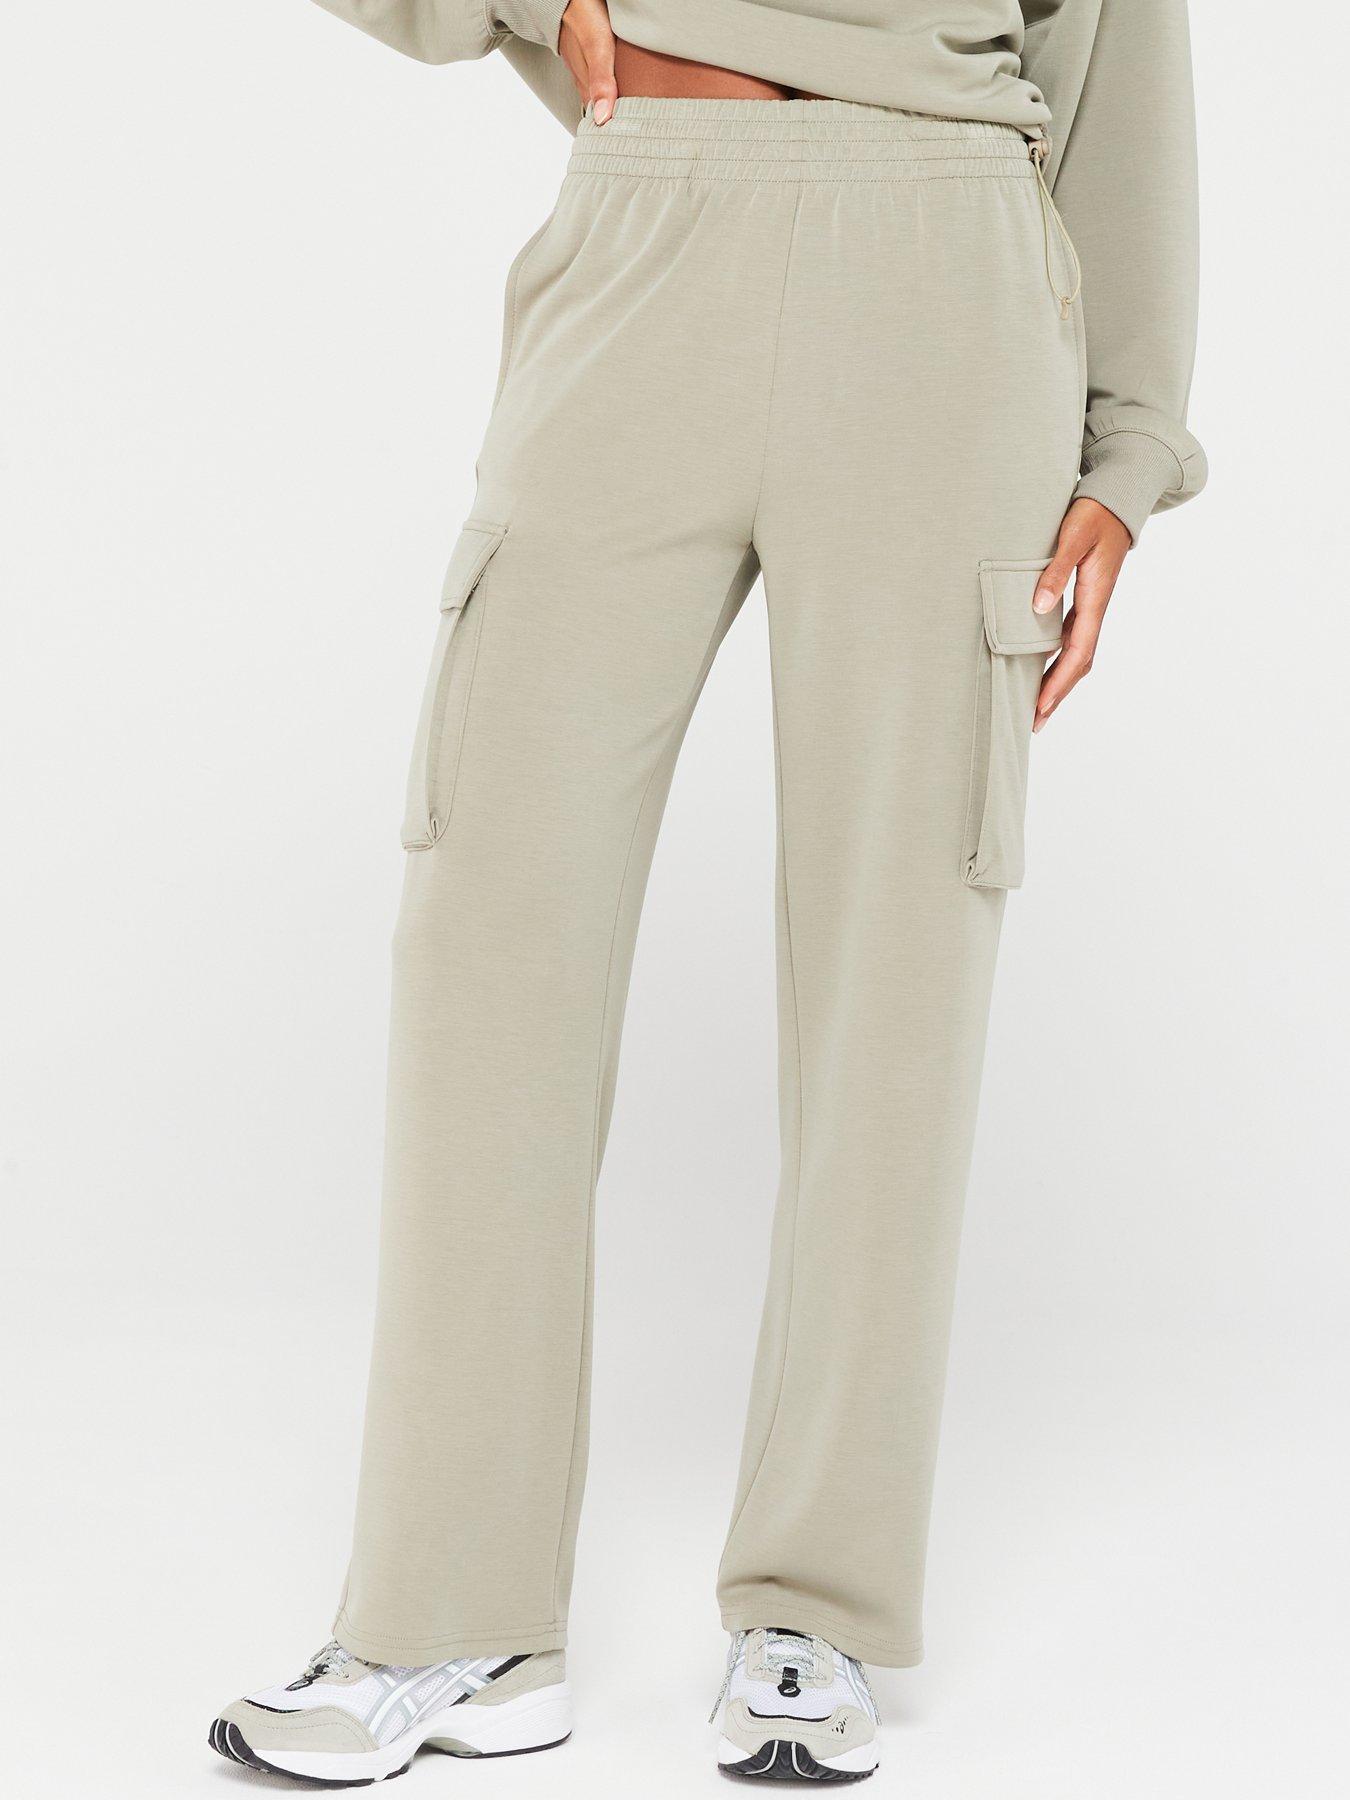 These 'Stretchy' Lounge Pants Are on Sale at